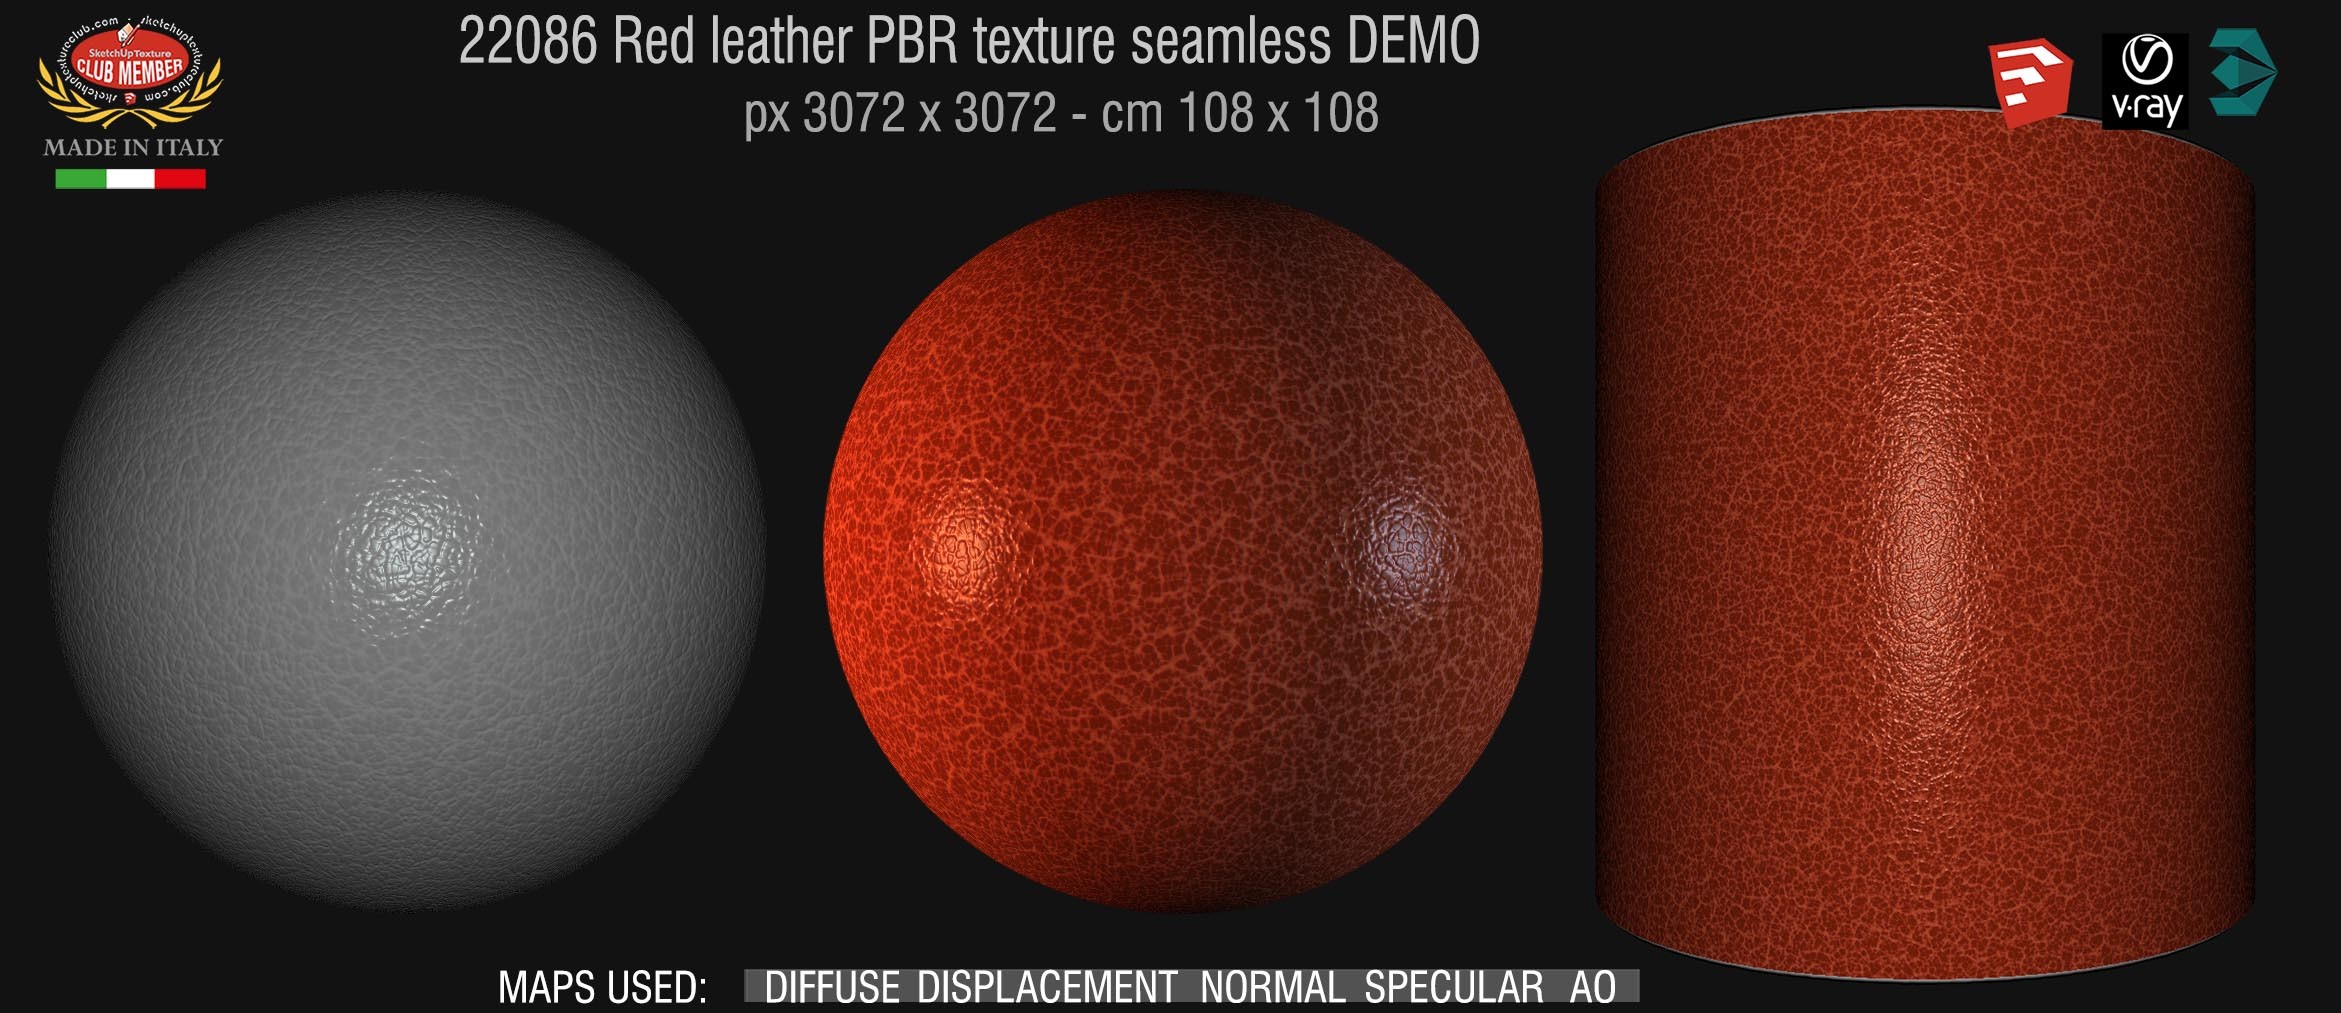 22086 Red leather PBR texture seamless DEMO